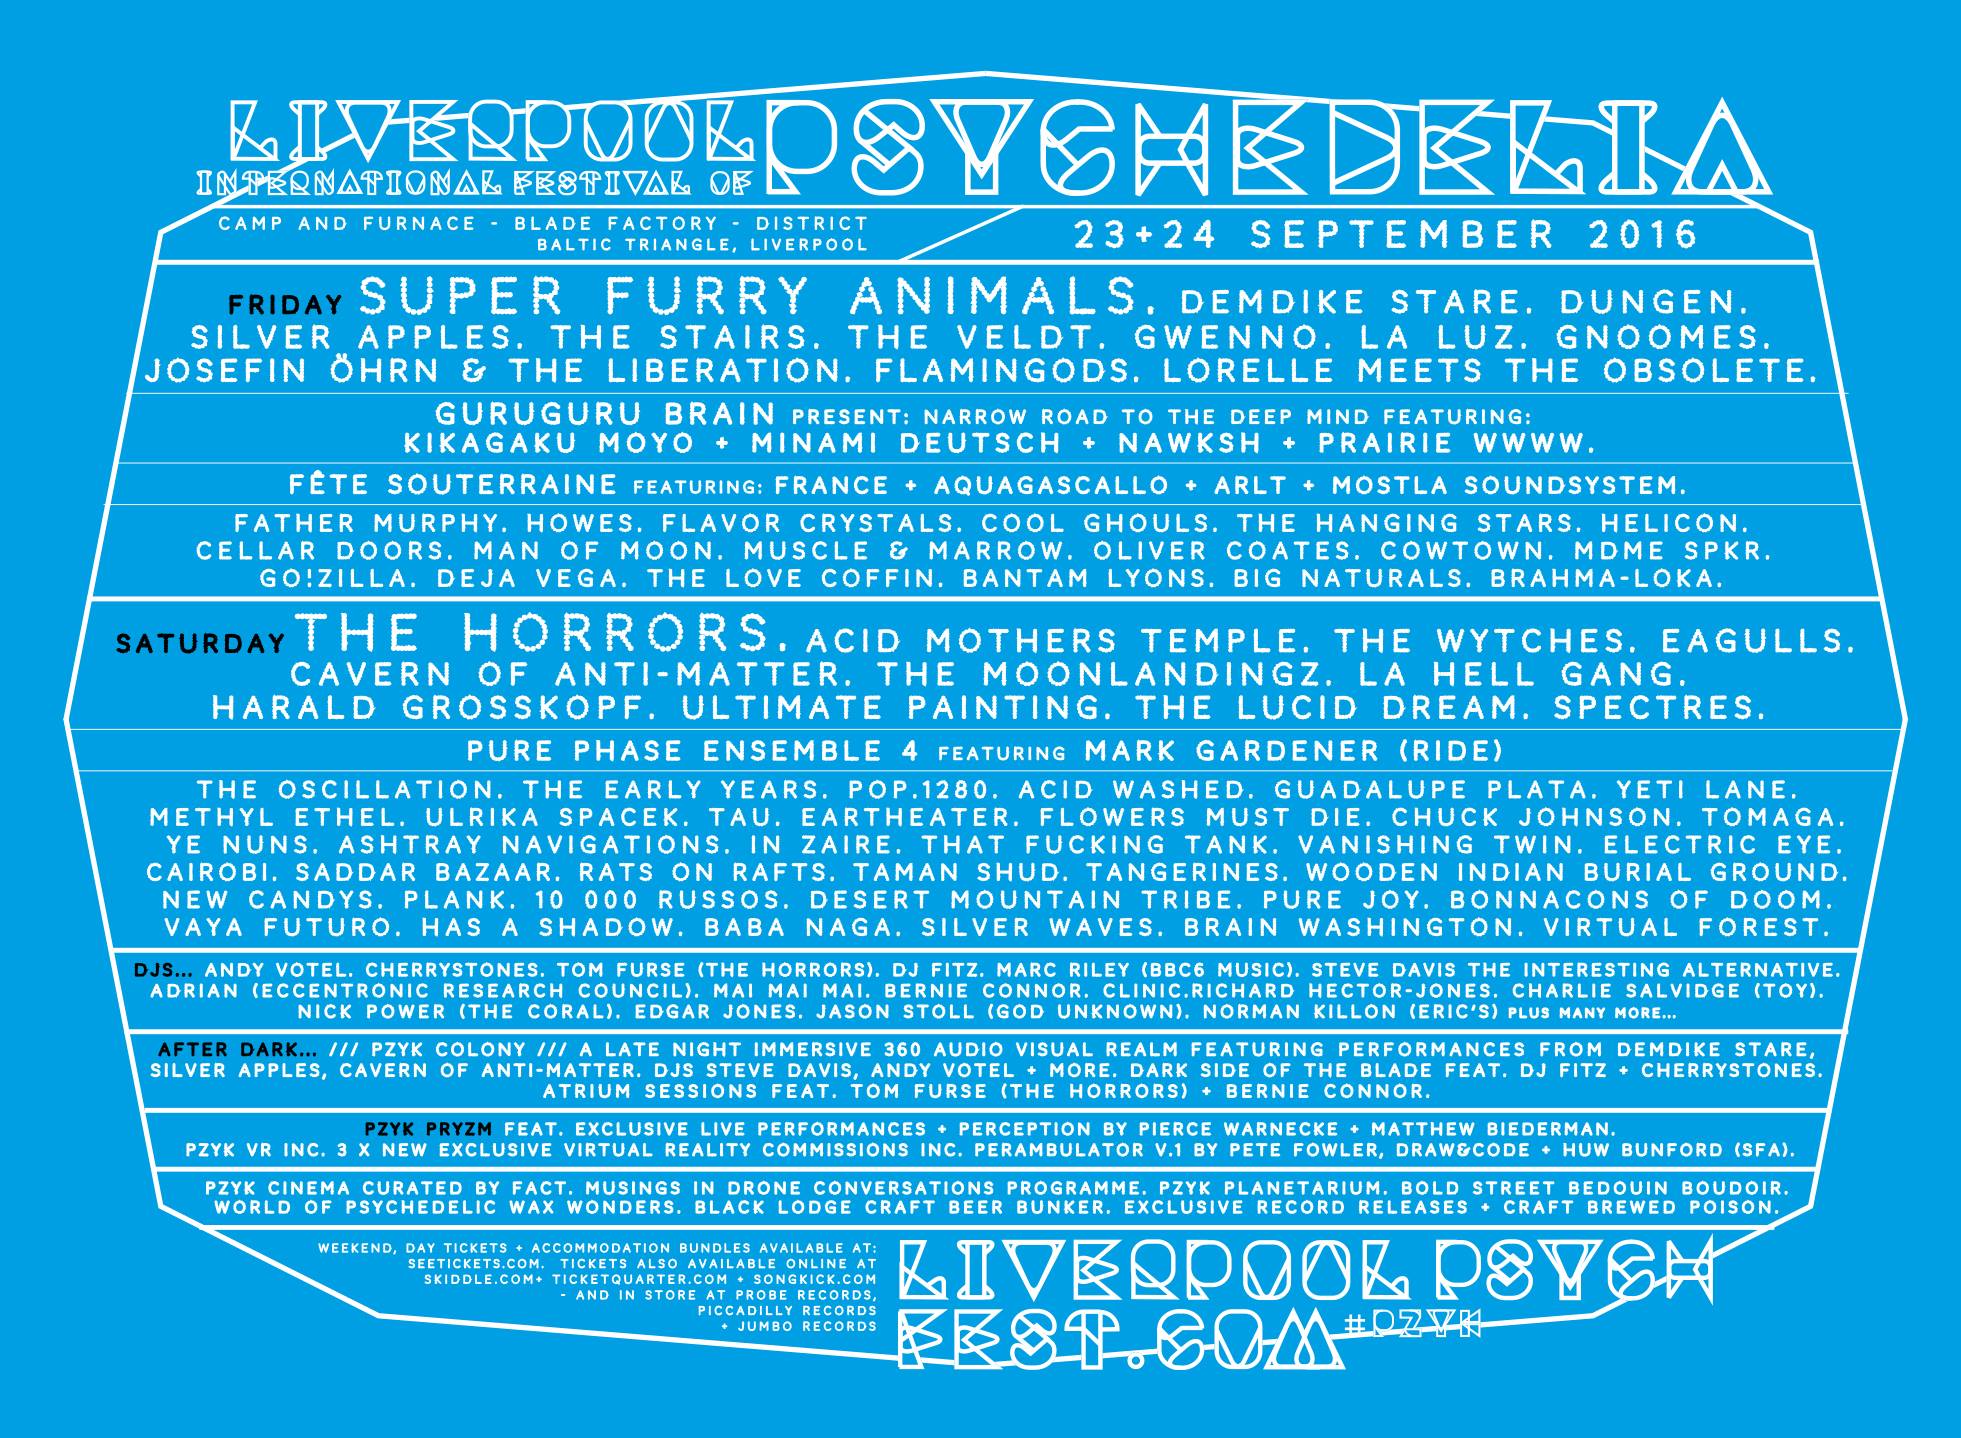 NEWS: Liverpool Psych Fest announces final wave of events for 2016